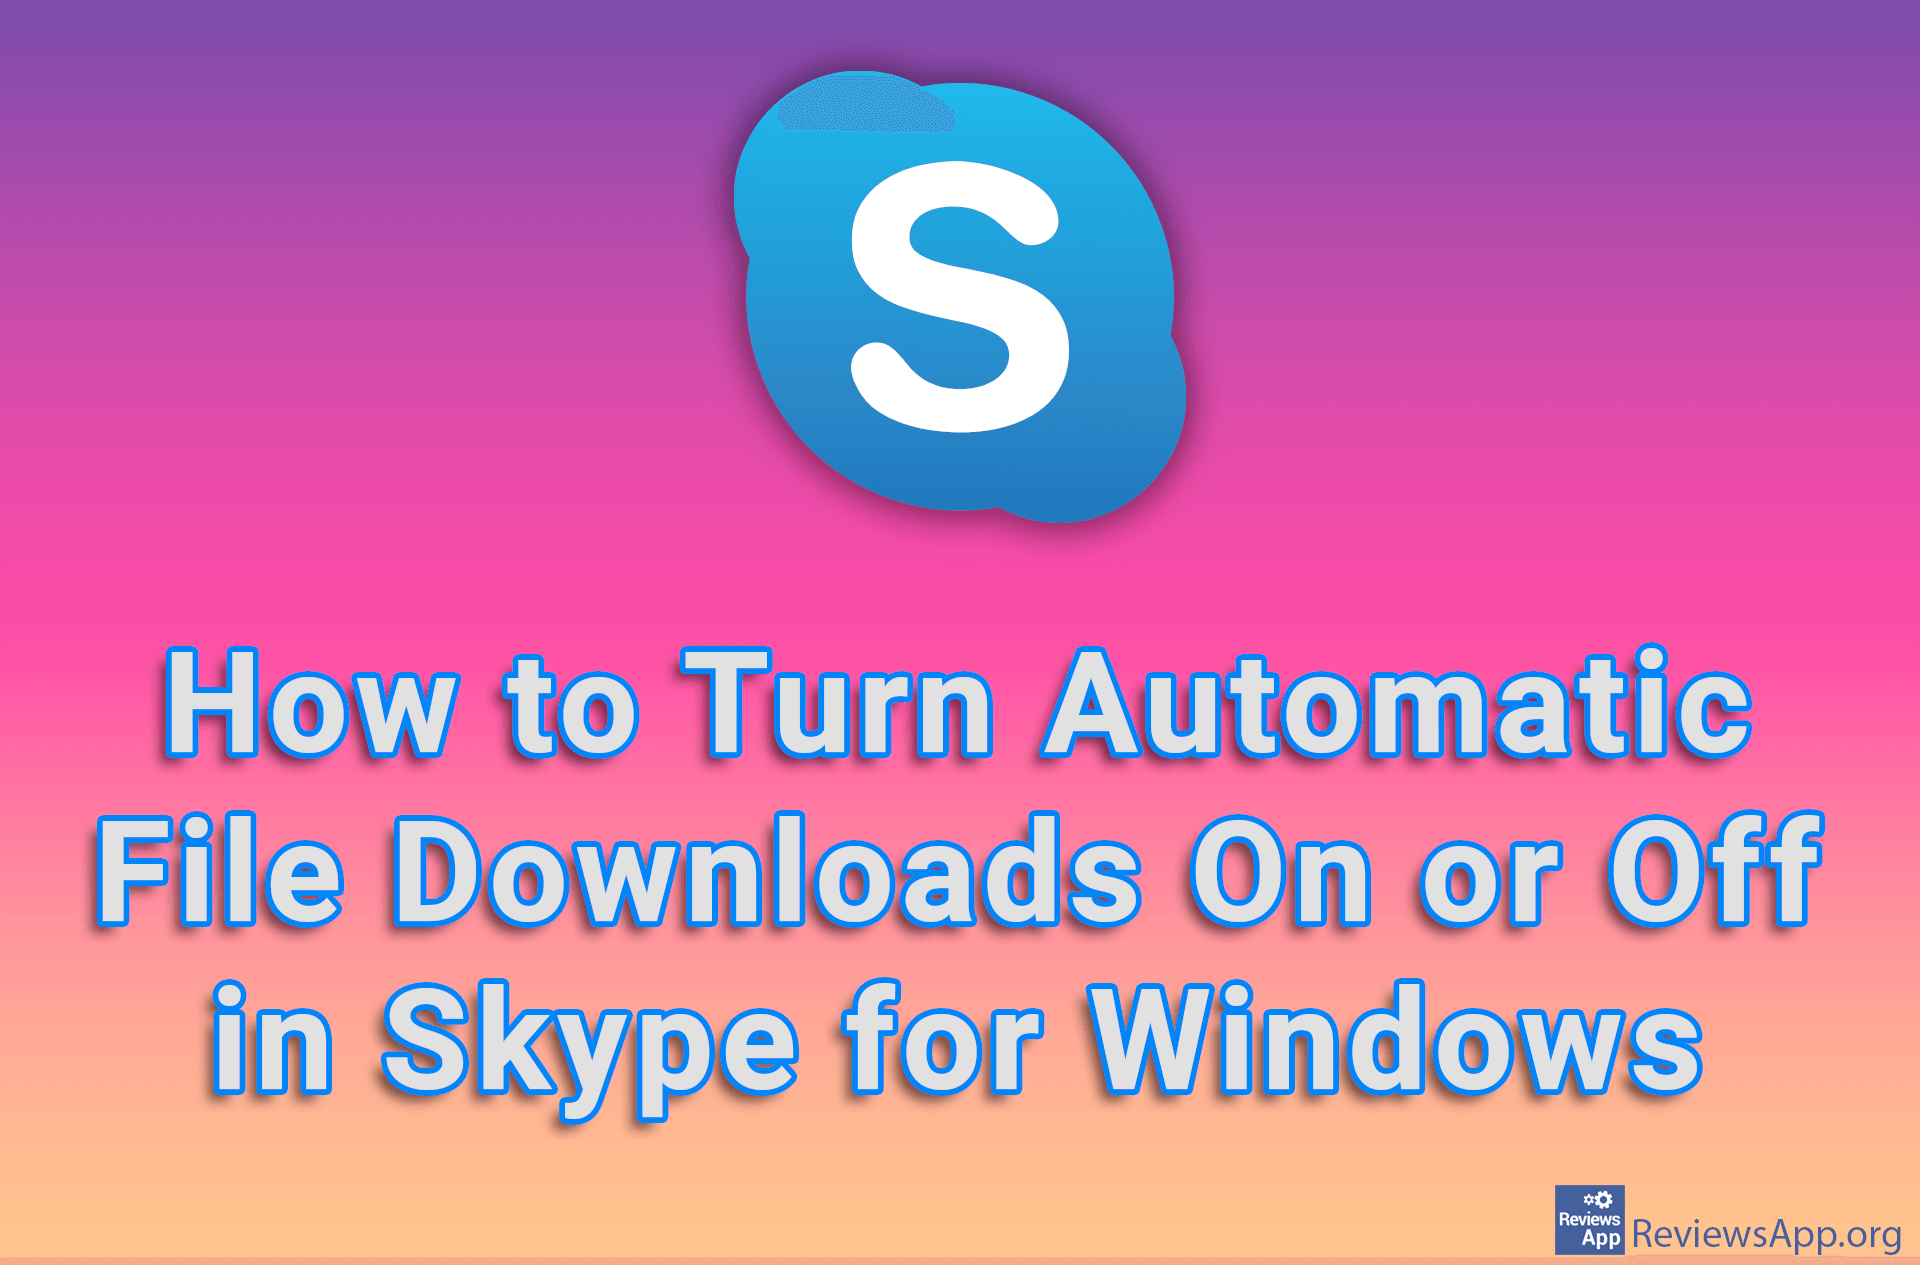 How to Turn Automatic File Downloads On or Off in Skype for Windows